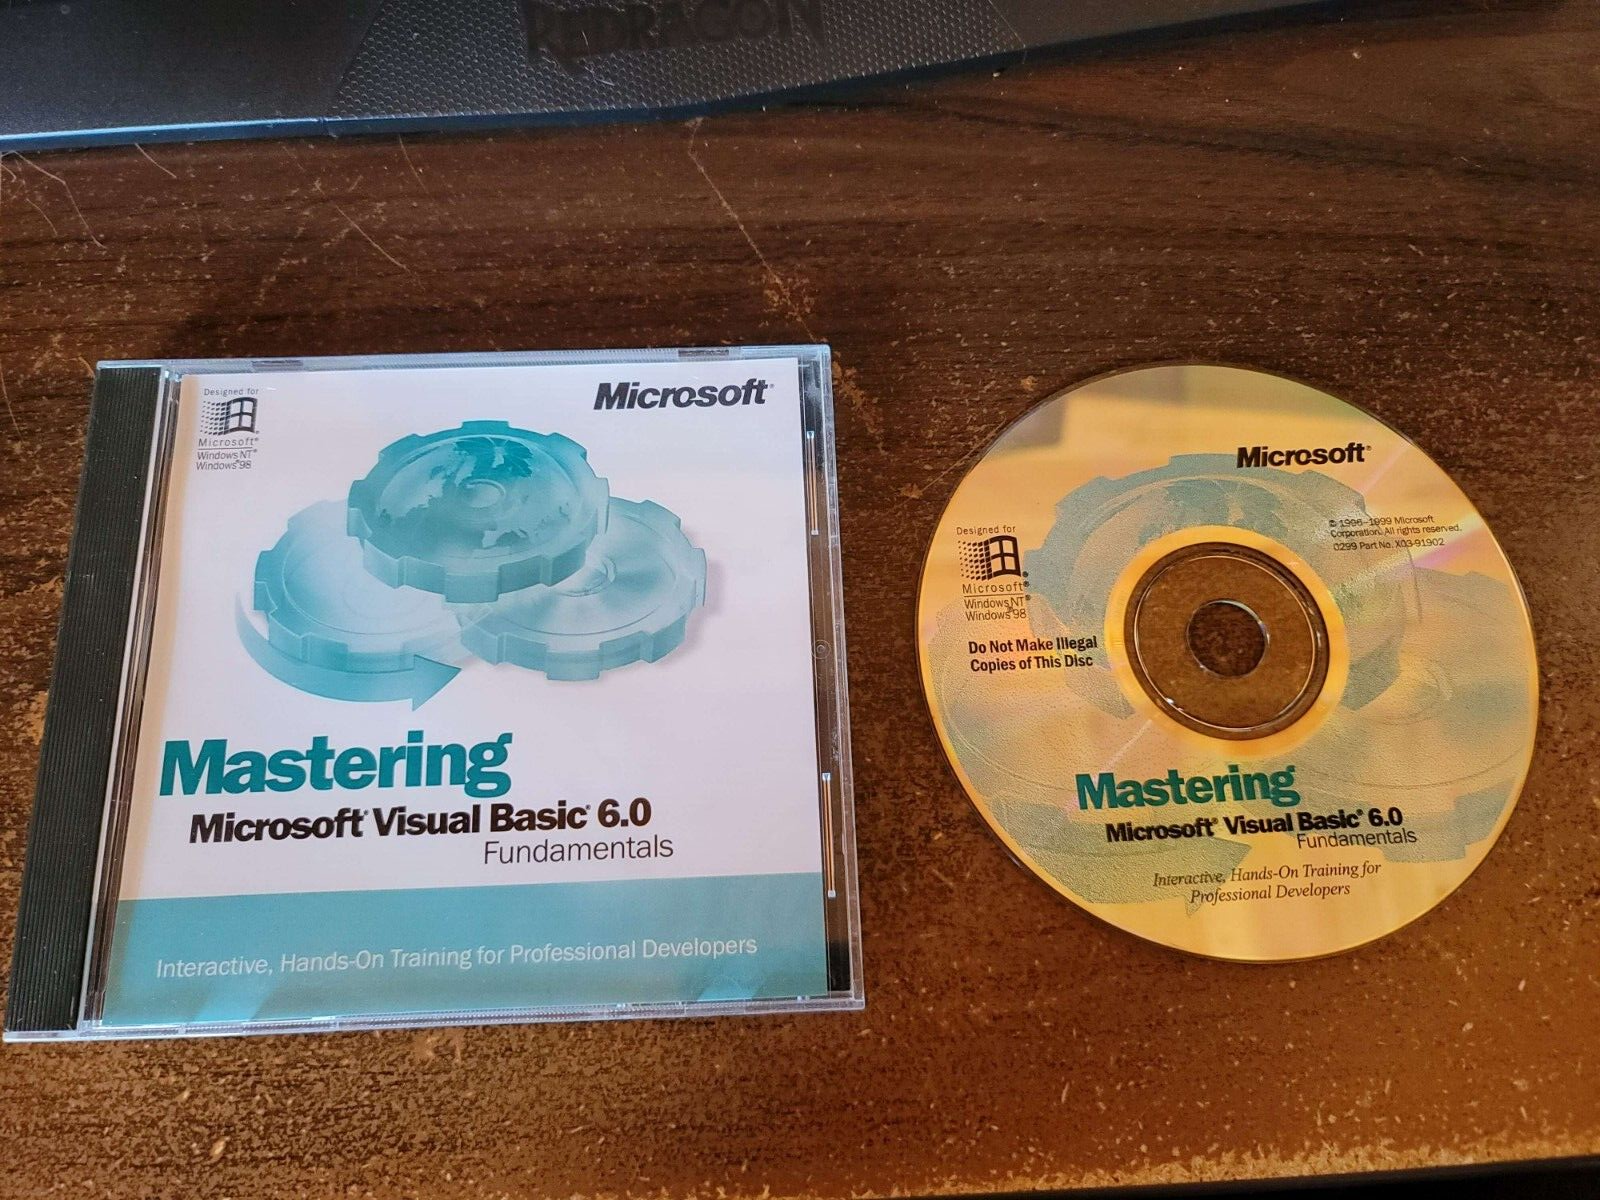 Primary image for Mastering Microsoft Visual Basic 6.0 Fundamentals Disc and Key